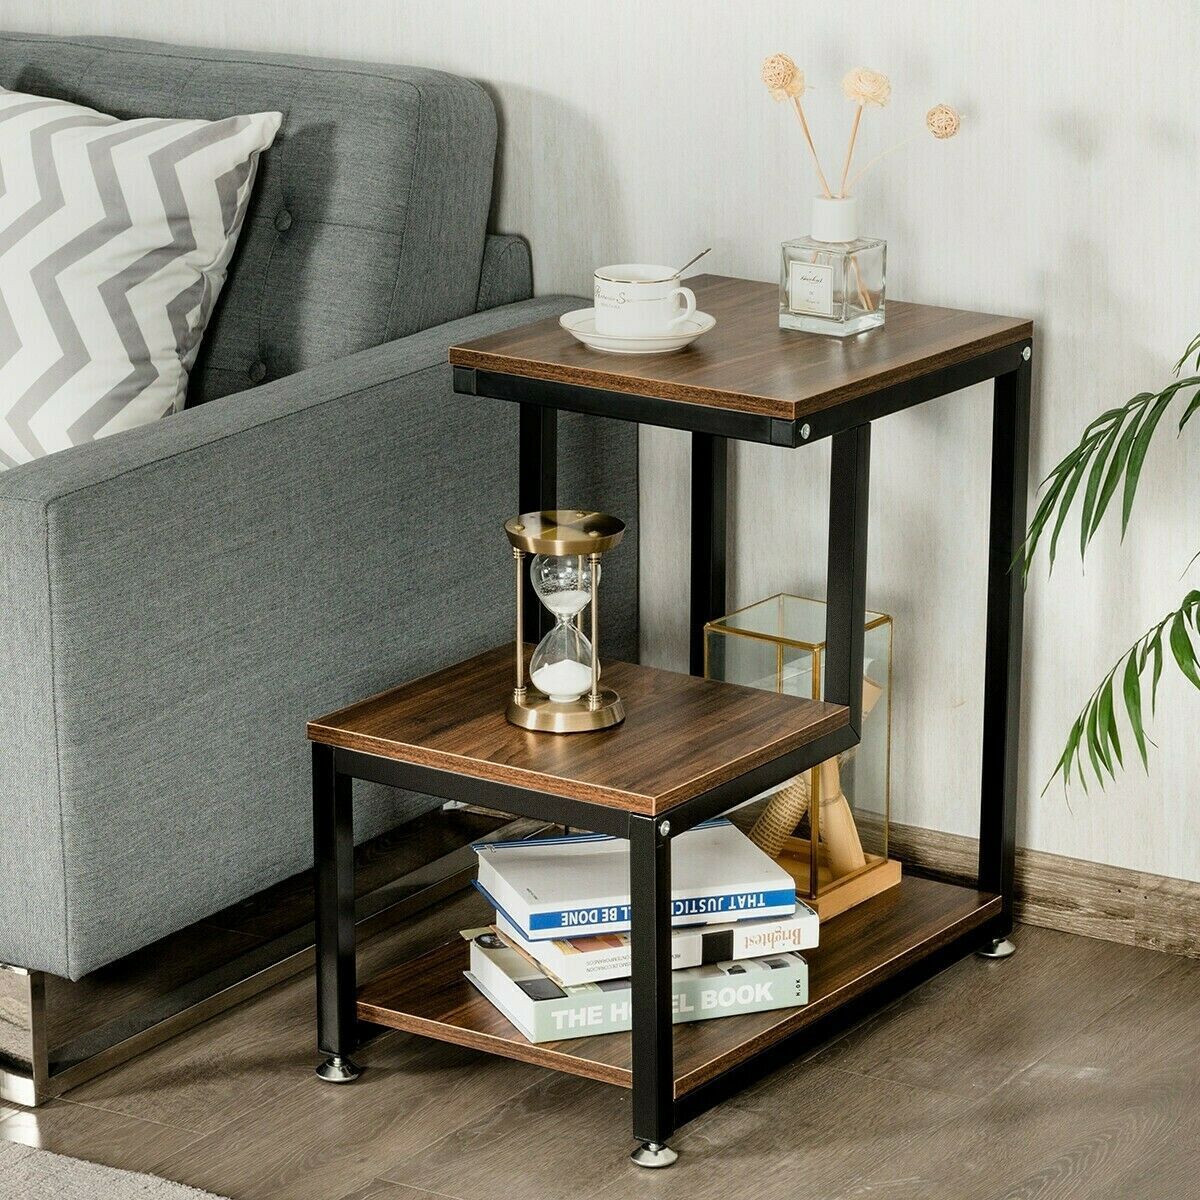 Side table +110 Unique Living Room Furniture Pieces That Amaze Everyone - 22